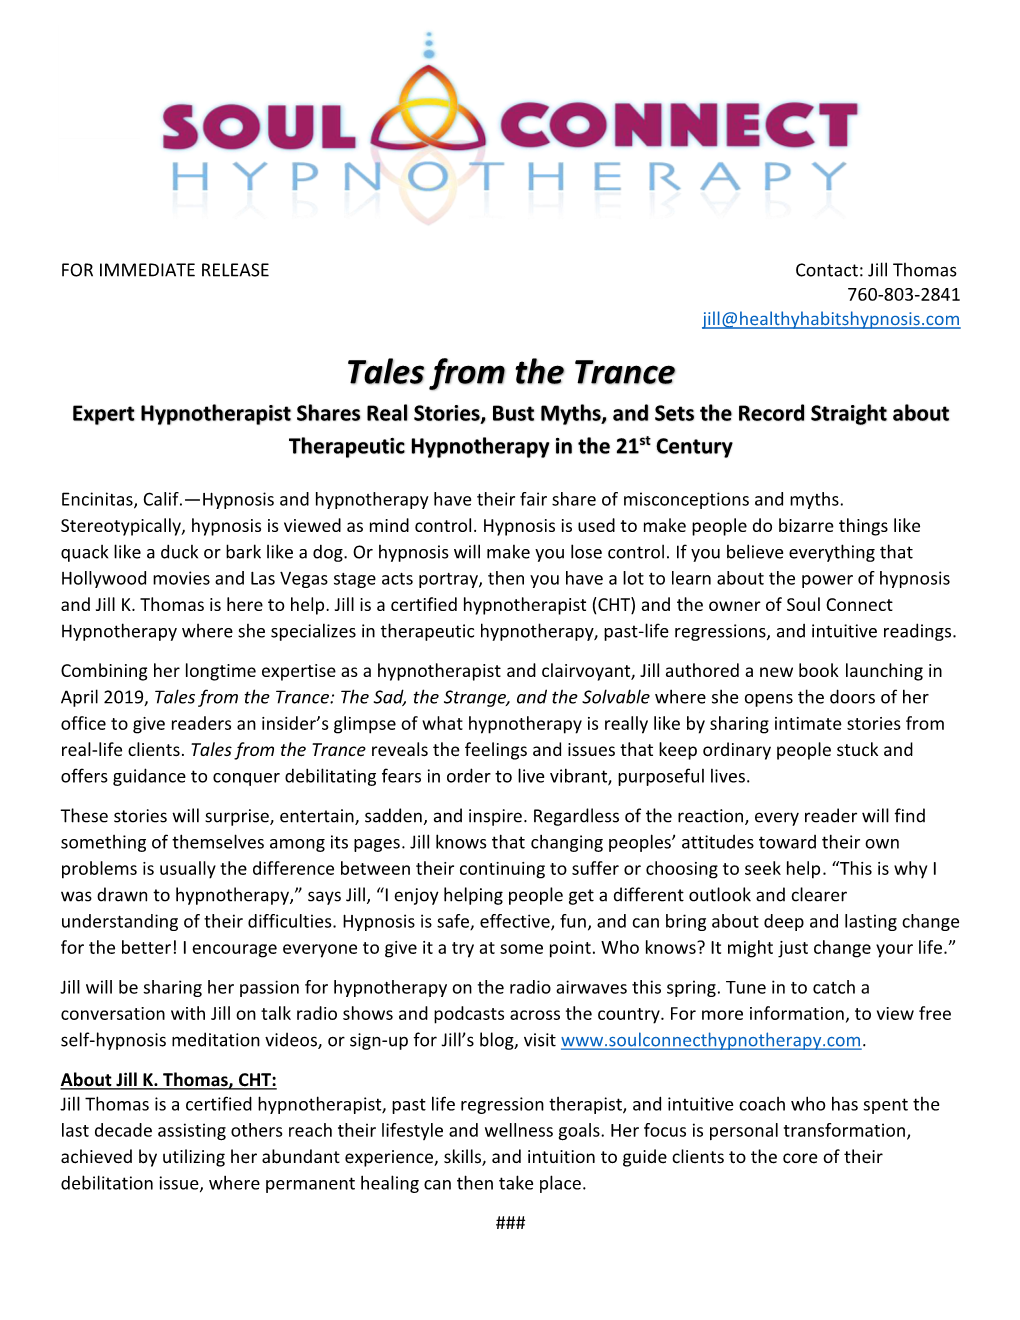 Tales from the Trance Expert Hypnotherapist Shares Real Stories, Bust Myths, and Sets the Record Straight About Therapeutic Hypnotherapy in the 21St Century